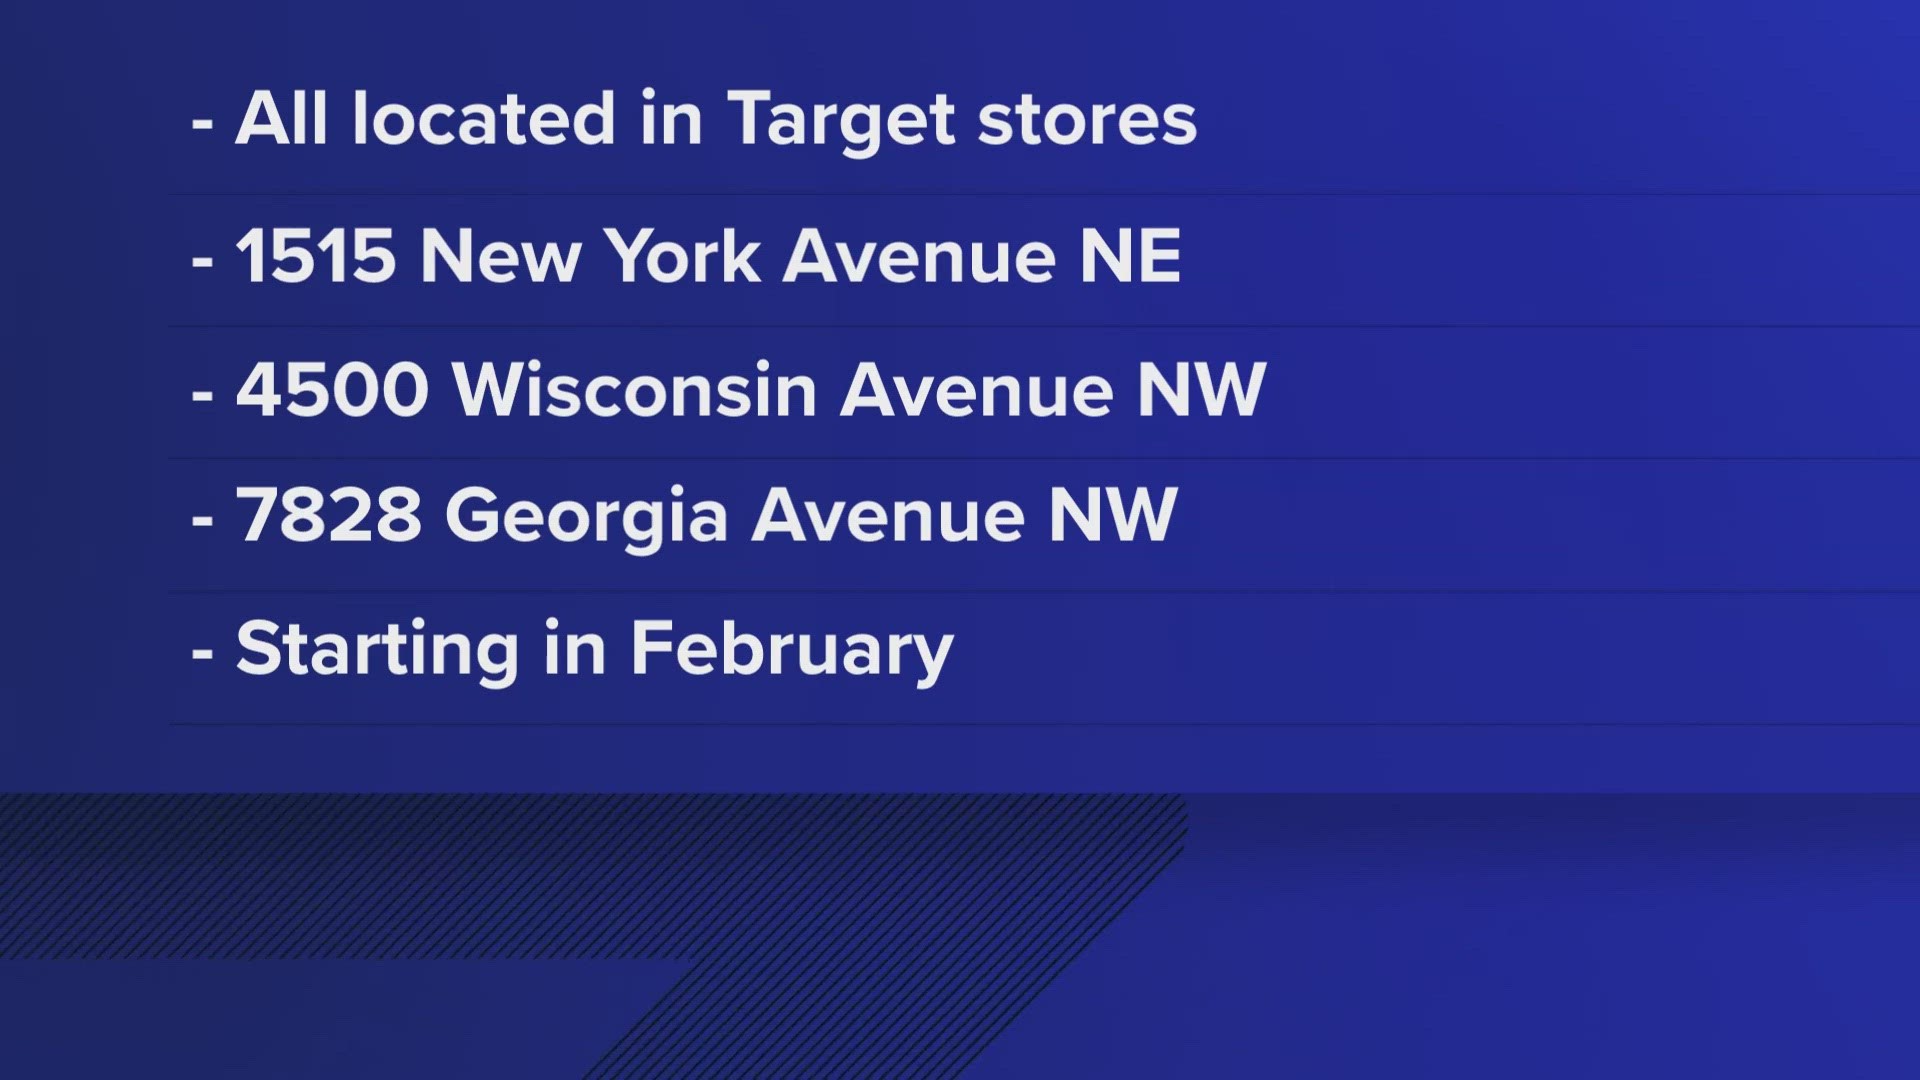 On Friday, a spokesperson for CVS announced that select CVS Pharmacy in Target locations will be closing in early 2024.